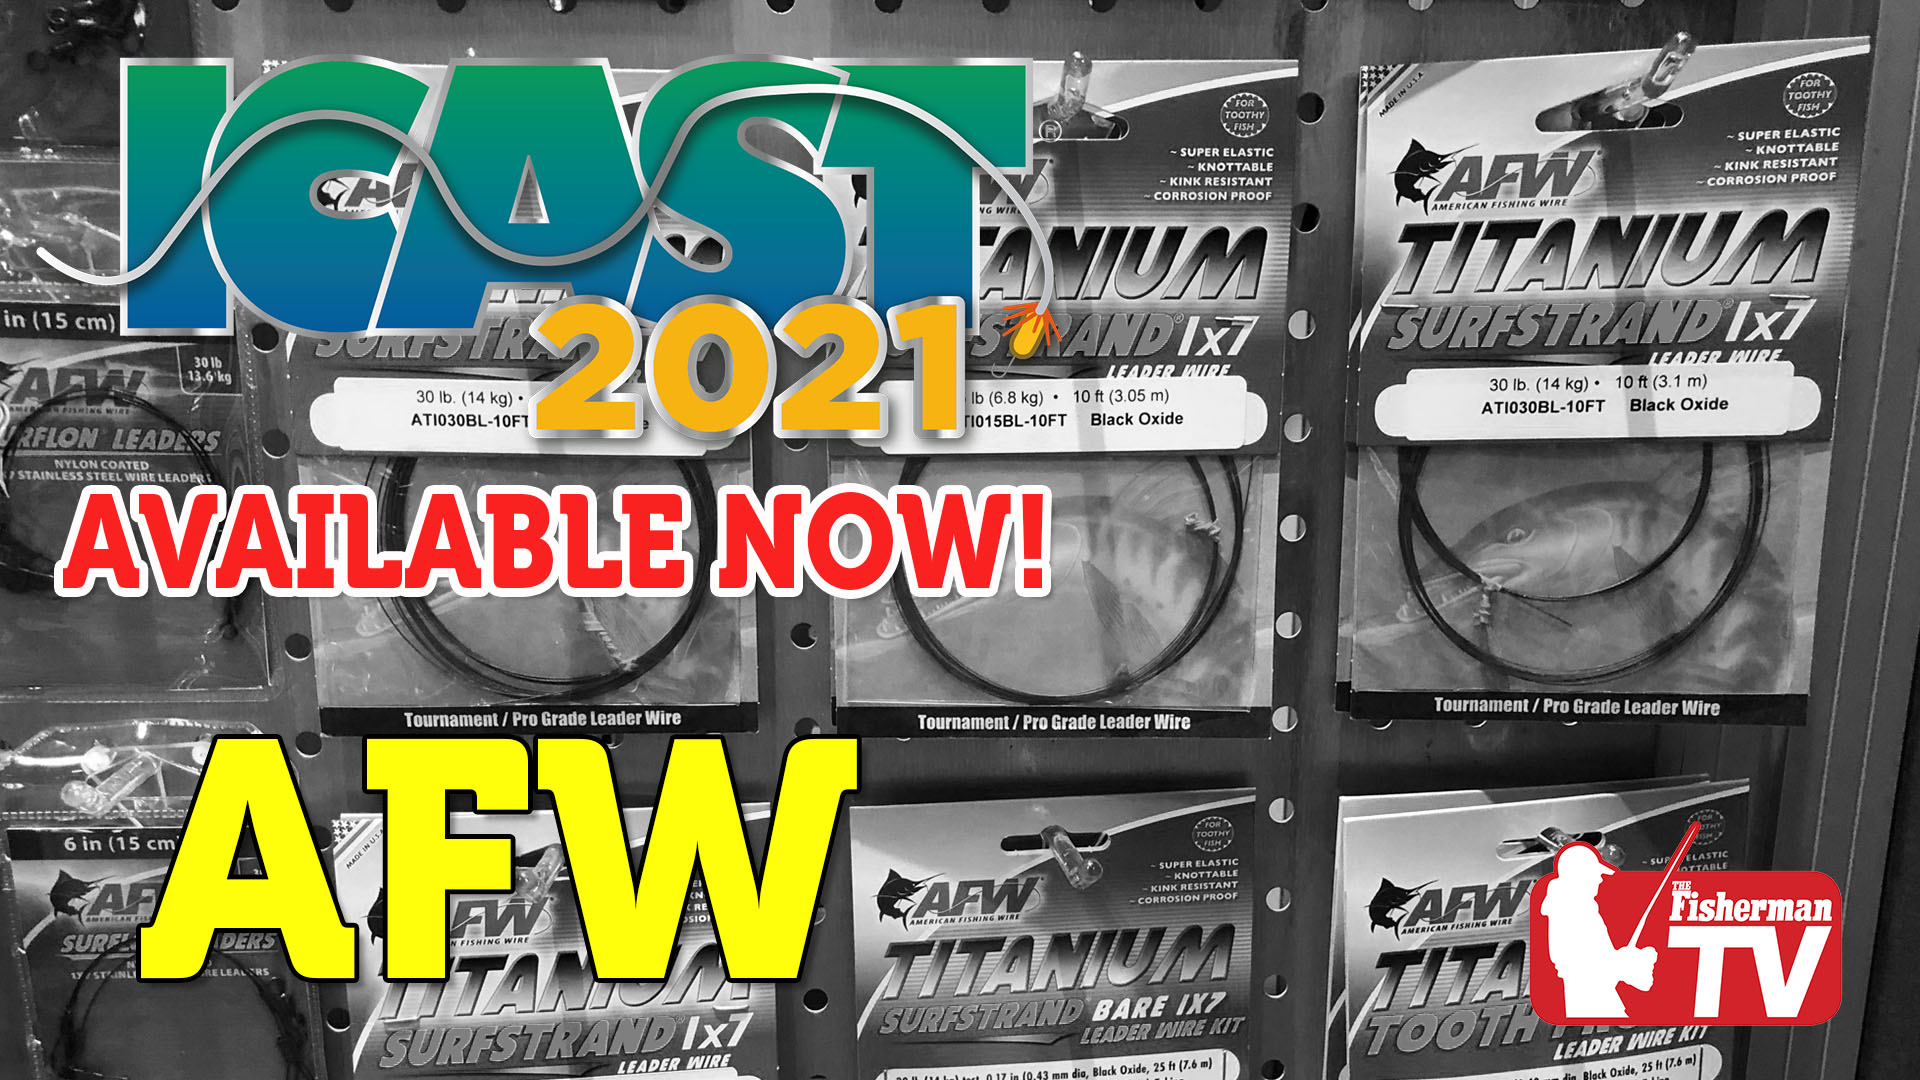 The Fisherman's “New Product Spotlight” ICAST 2021 – AFW Titanium